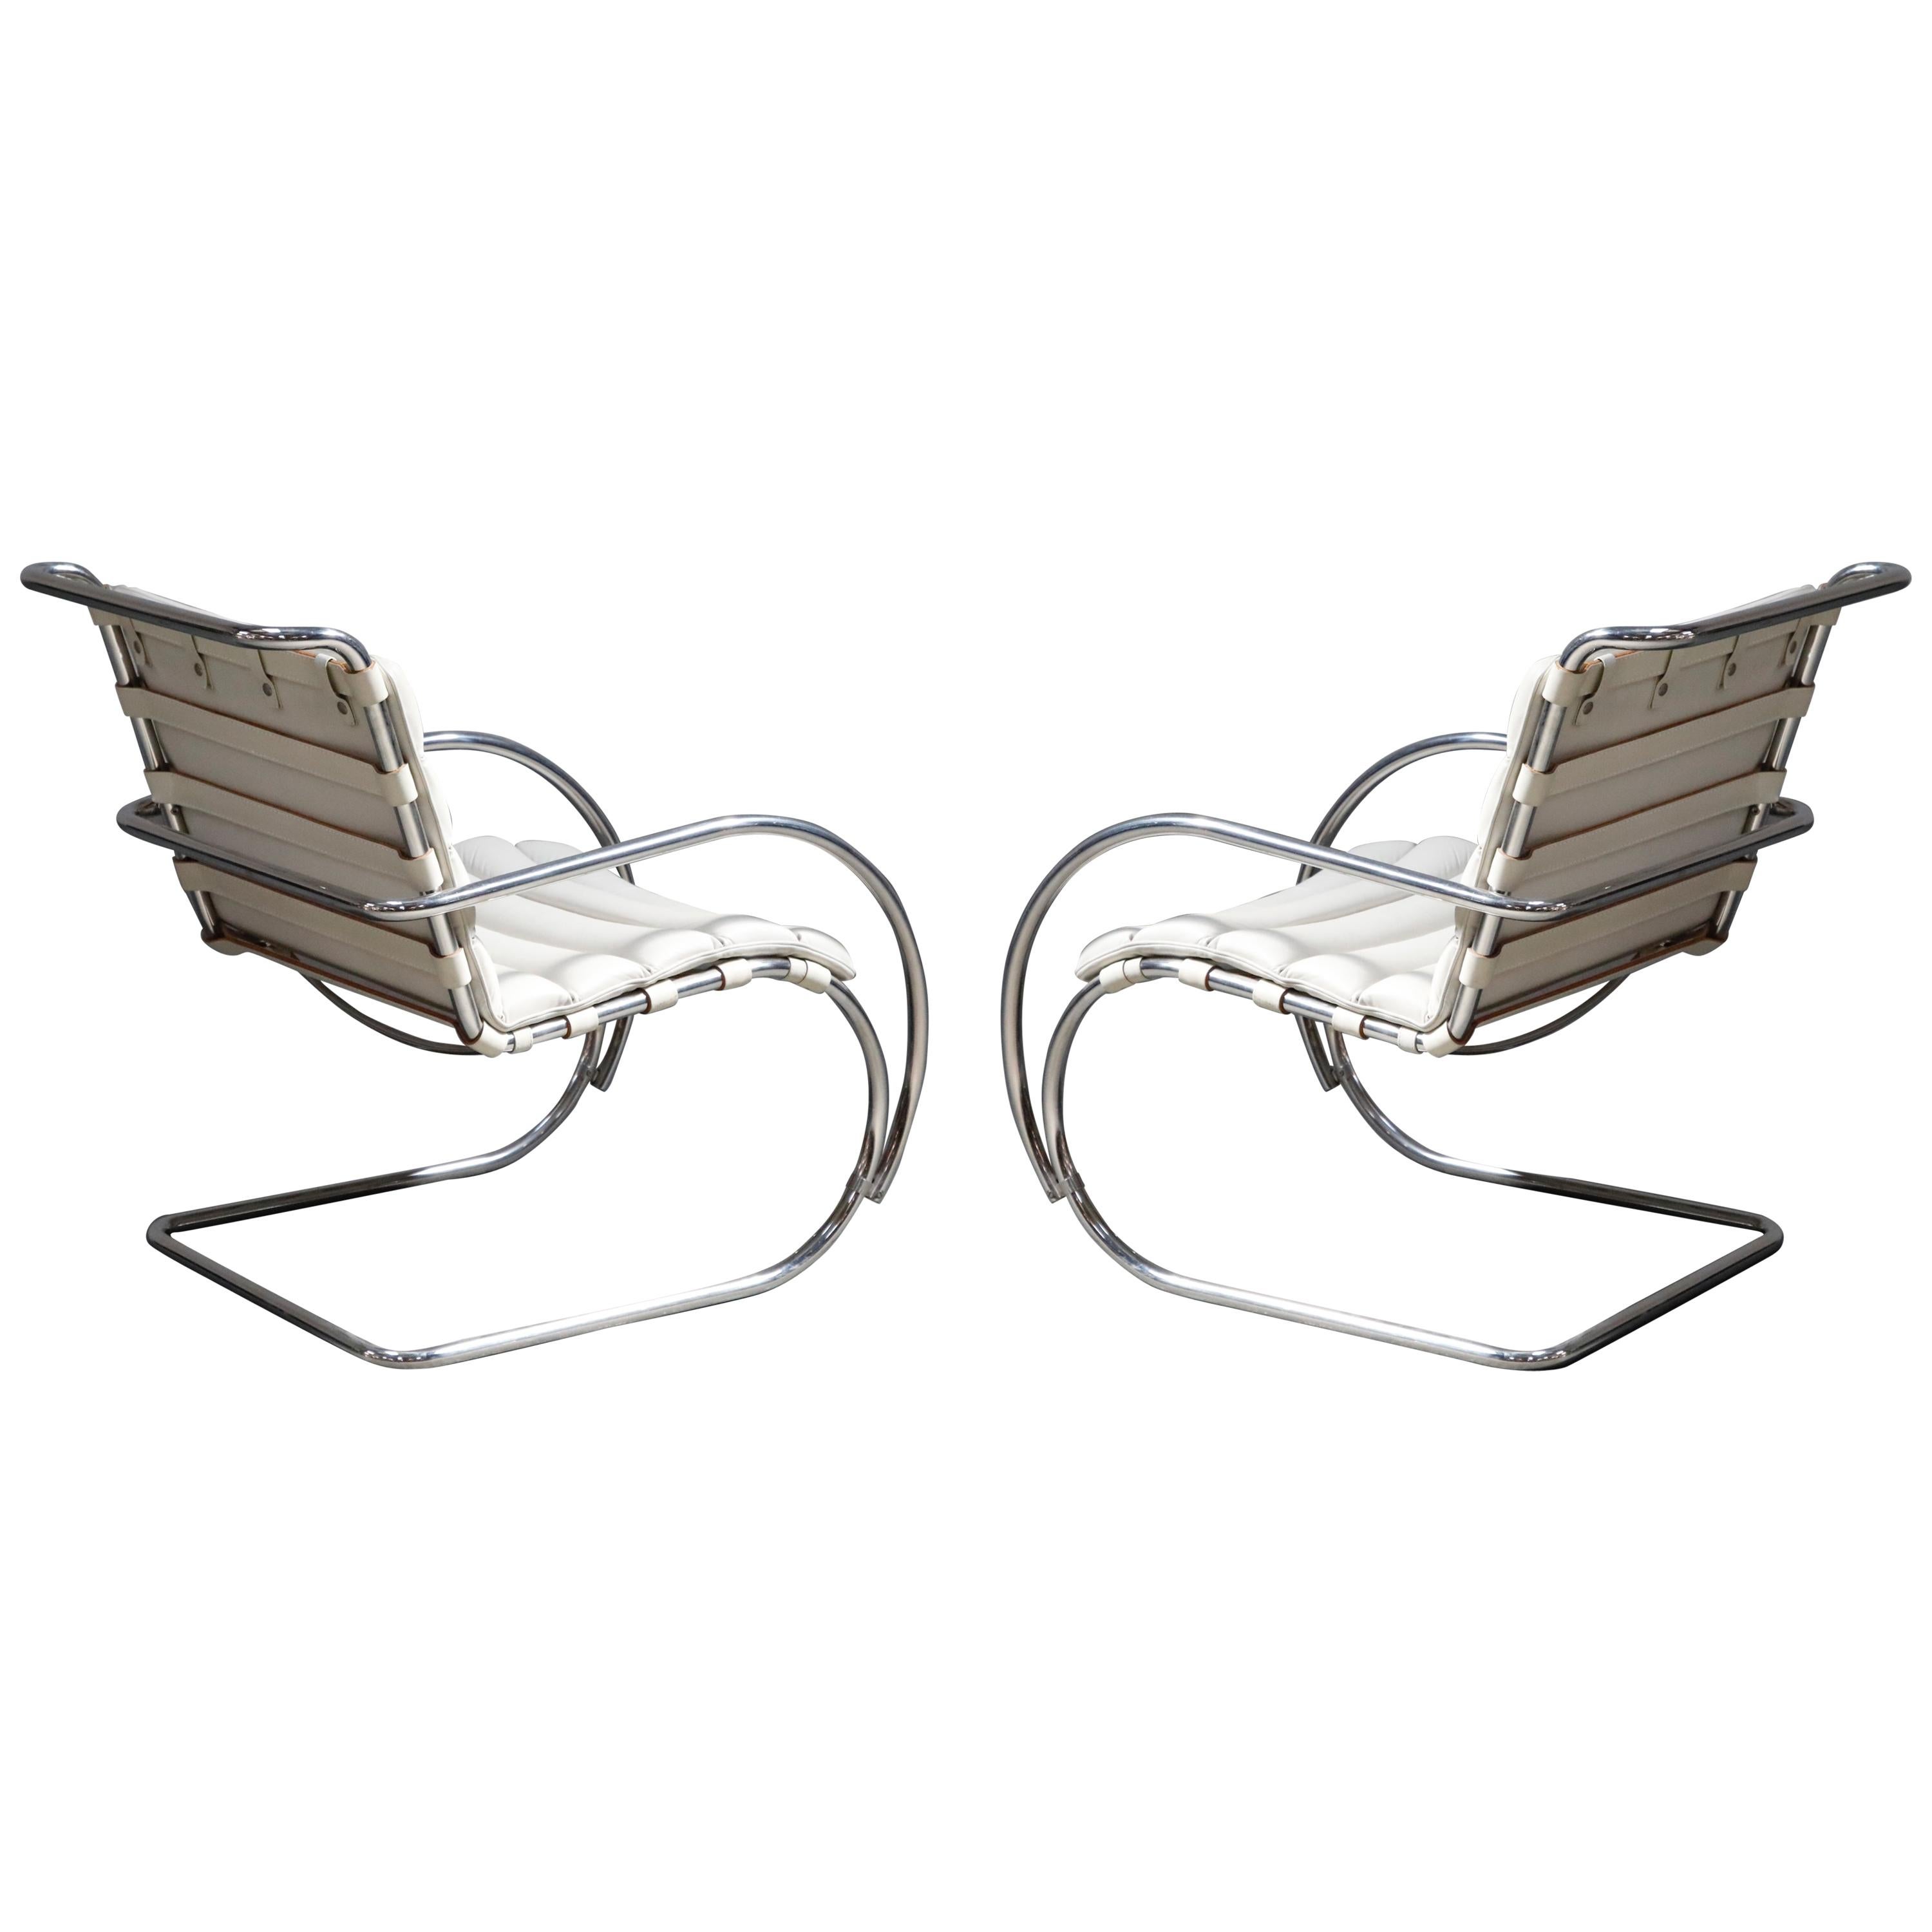 Pair of MR Lounge Armchairs by Mies van der Rohe for Knoll Studio, Signed